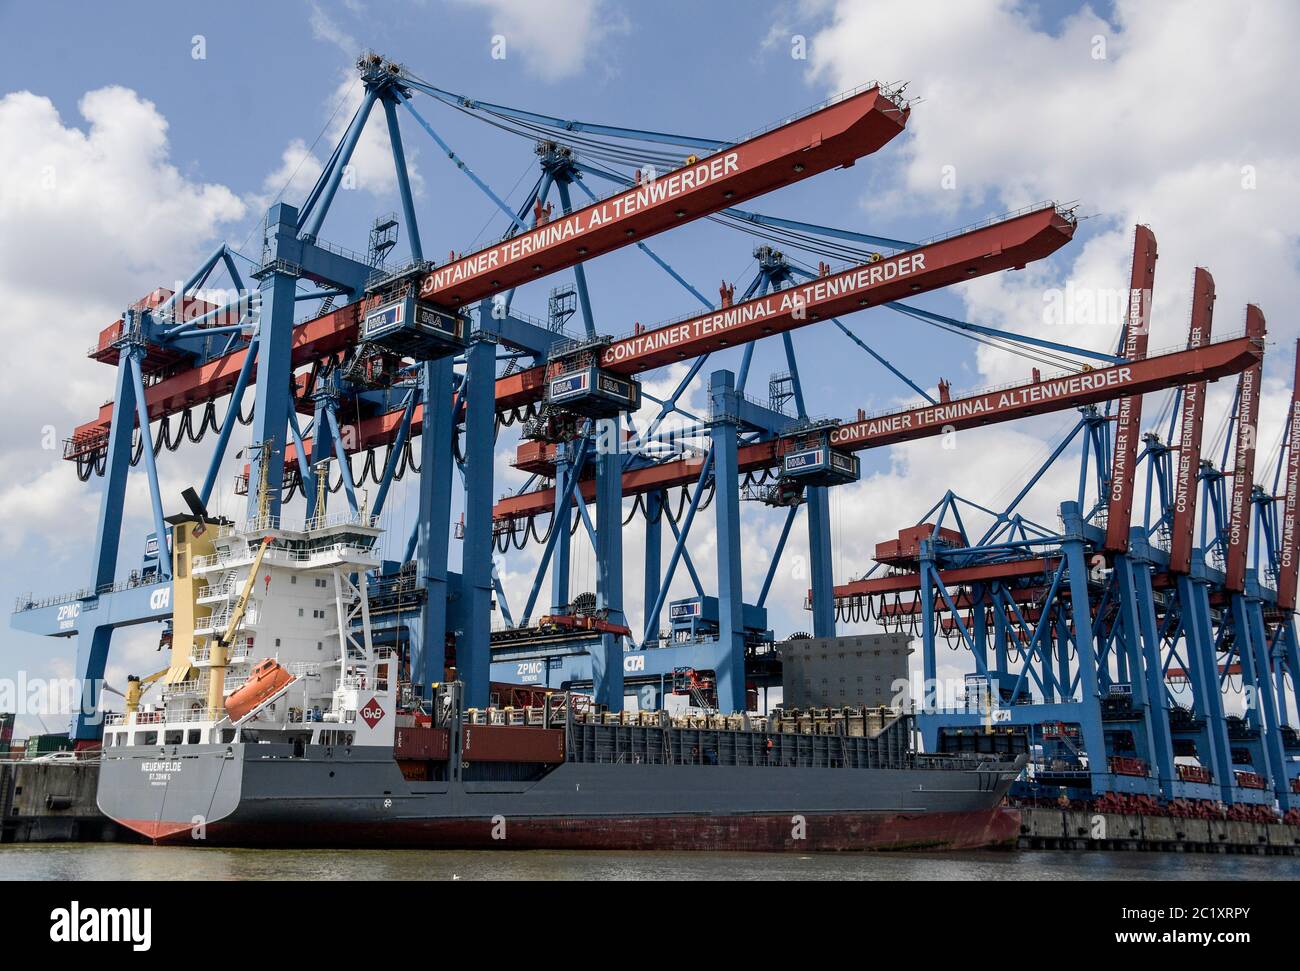 Hamburg, Germany. 15th June, 2020. The container freighter 'Neuenfelde' is unloaded at Altenwerder terminal. Hamburg's exports fell sharply in the first three months of the year. Compared with the same period last year, exports fell by 14.1 per cent to 10.5 billion euros, the Statistics Office North announced in the Hanseatic City on 16 June 2020. Credit: Axel Heimken/dpa/Alamy Live News Stock Photo